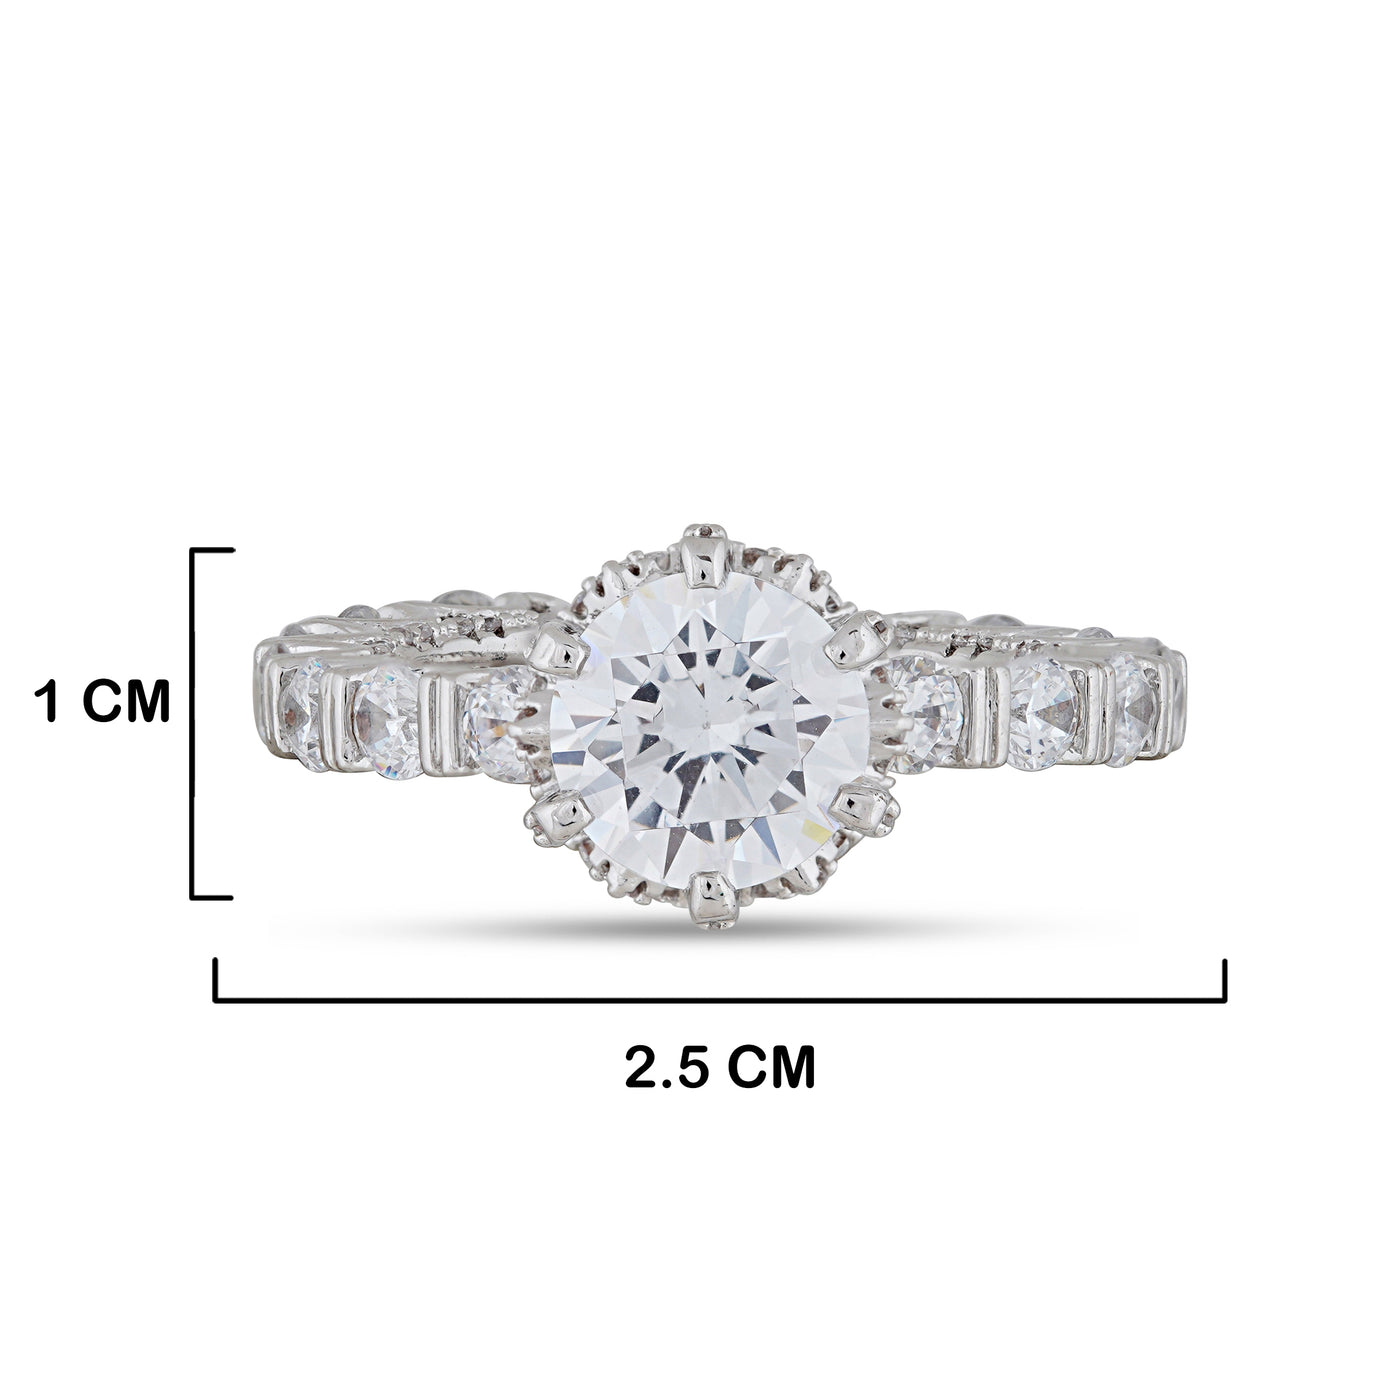 American Diamond Cubic Zirconia Ring with measurements in cm. 1cm by 2.5cm.